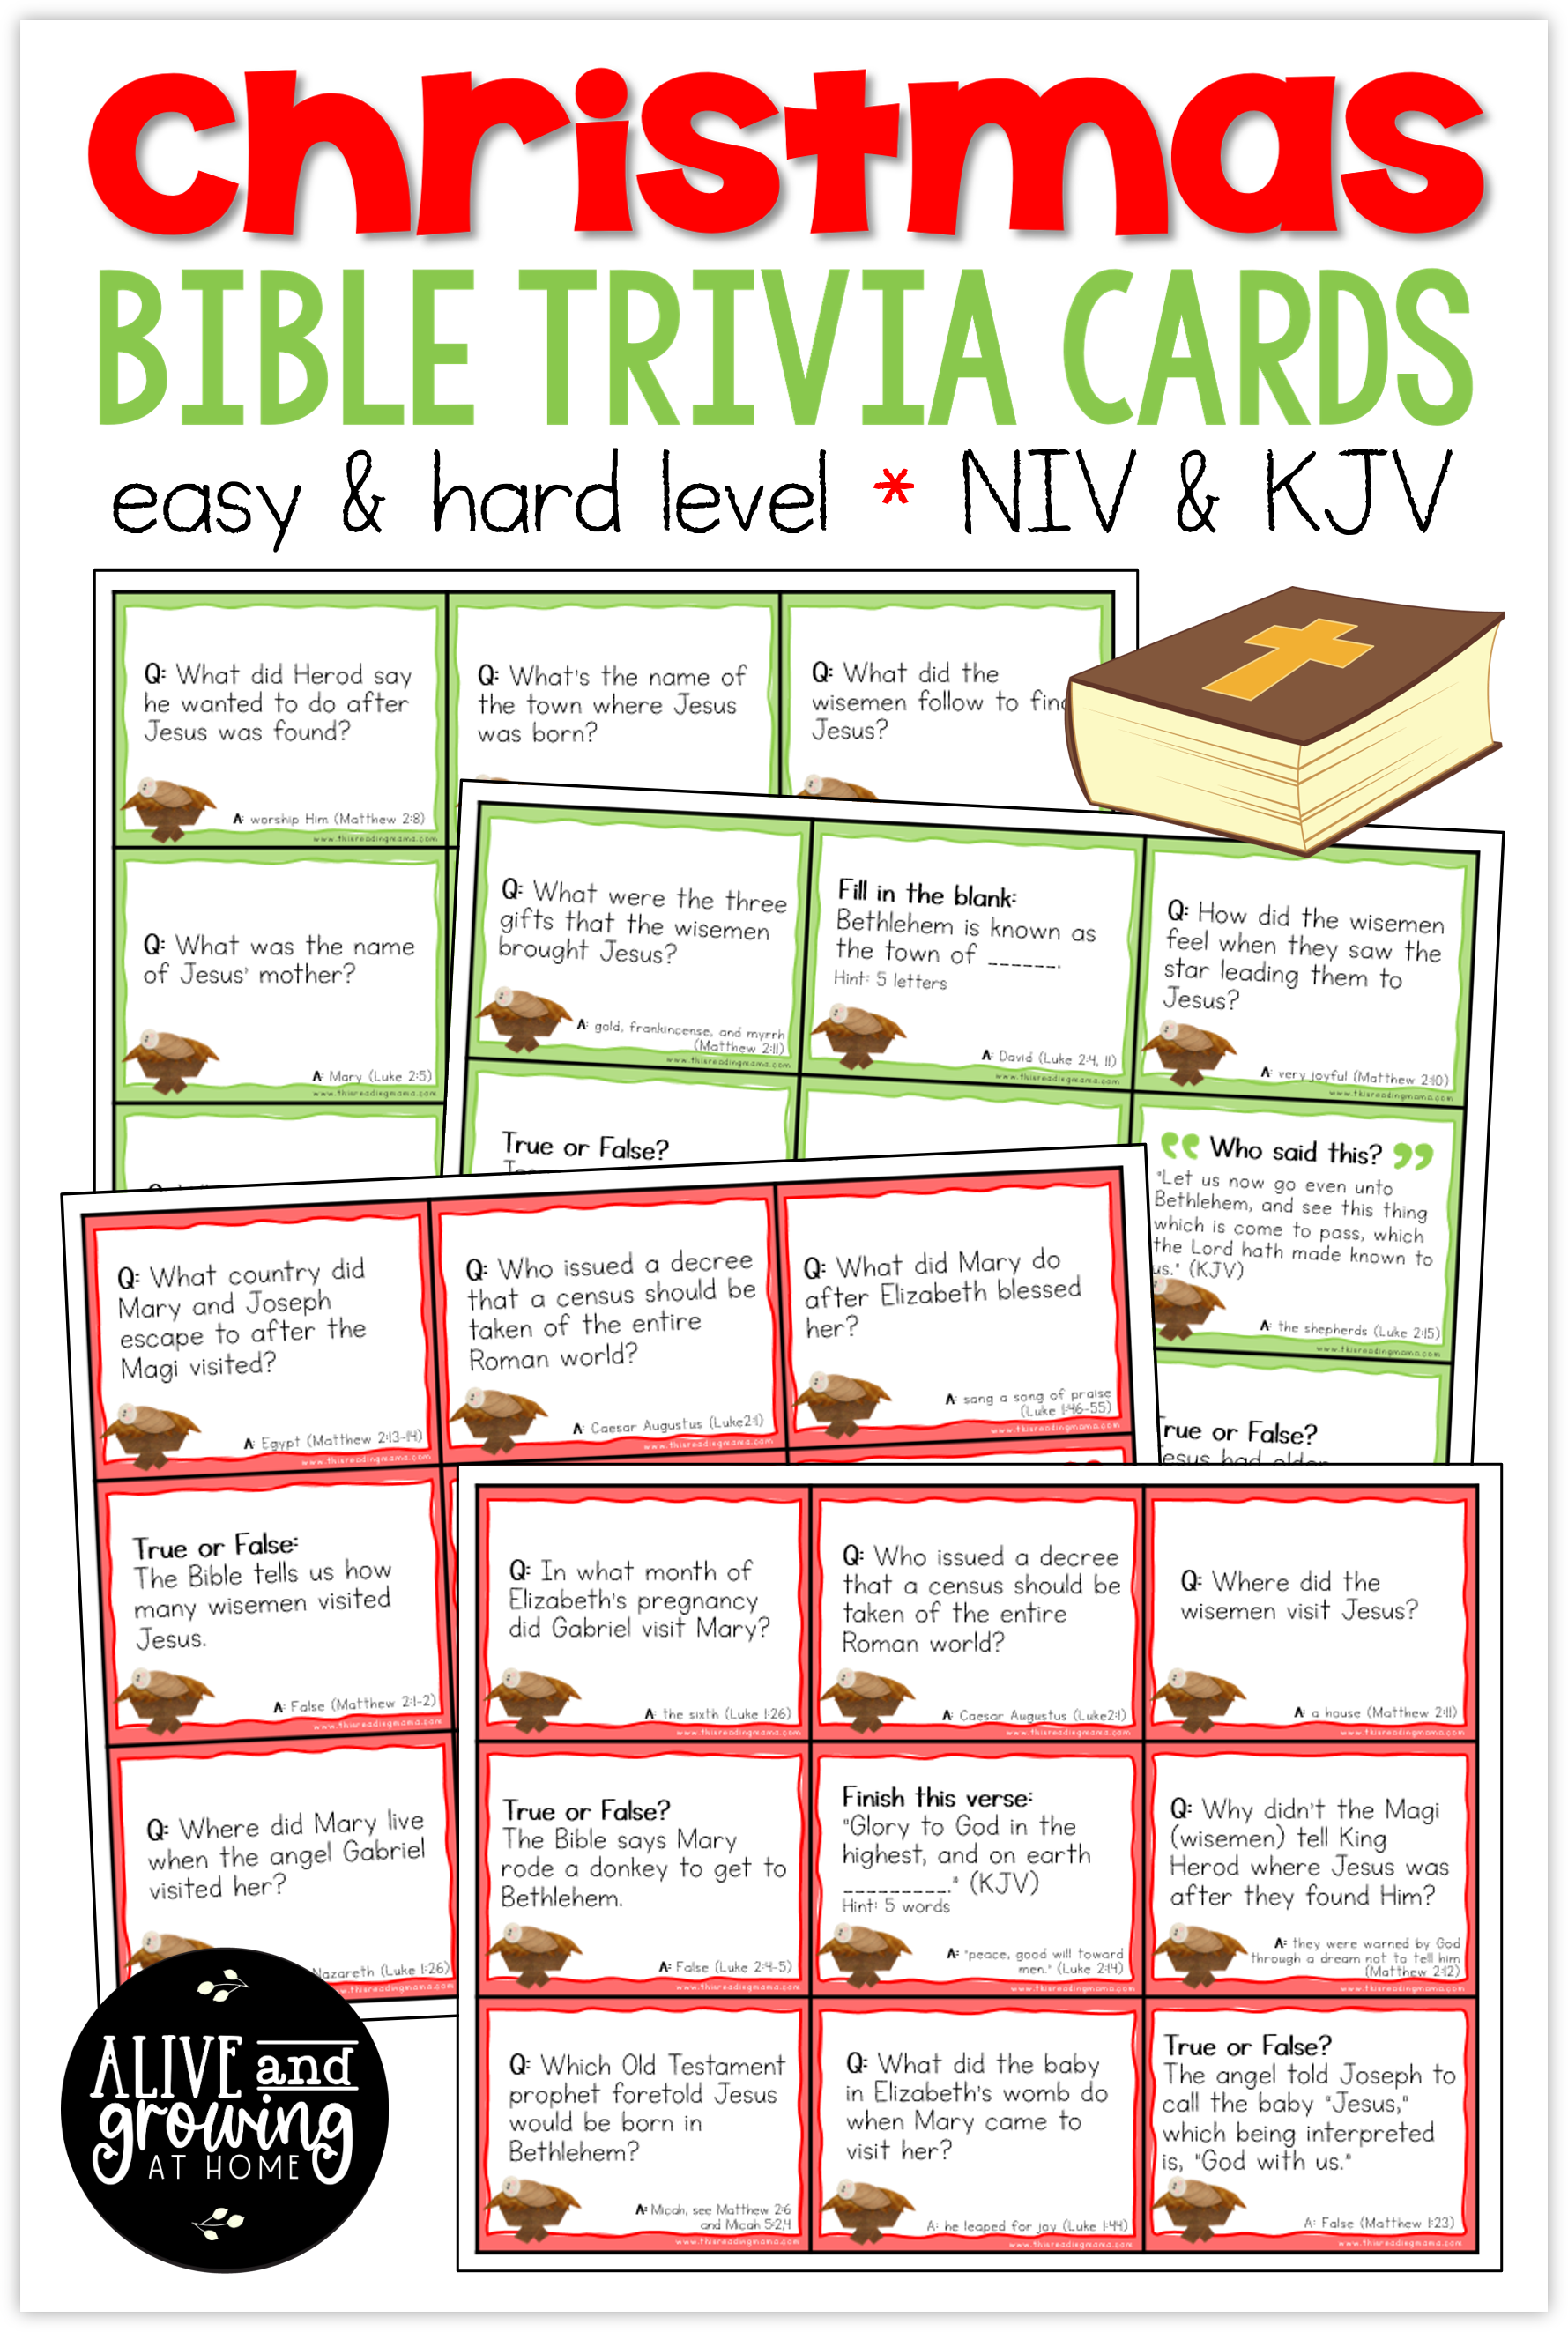 Christmas Bible Trivia Cards - Alive and Growing at Home